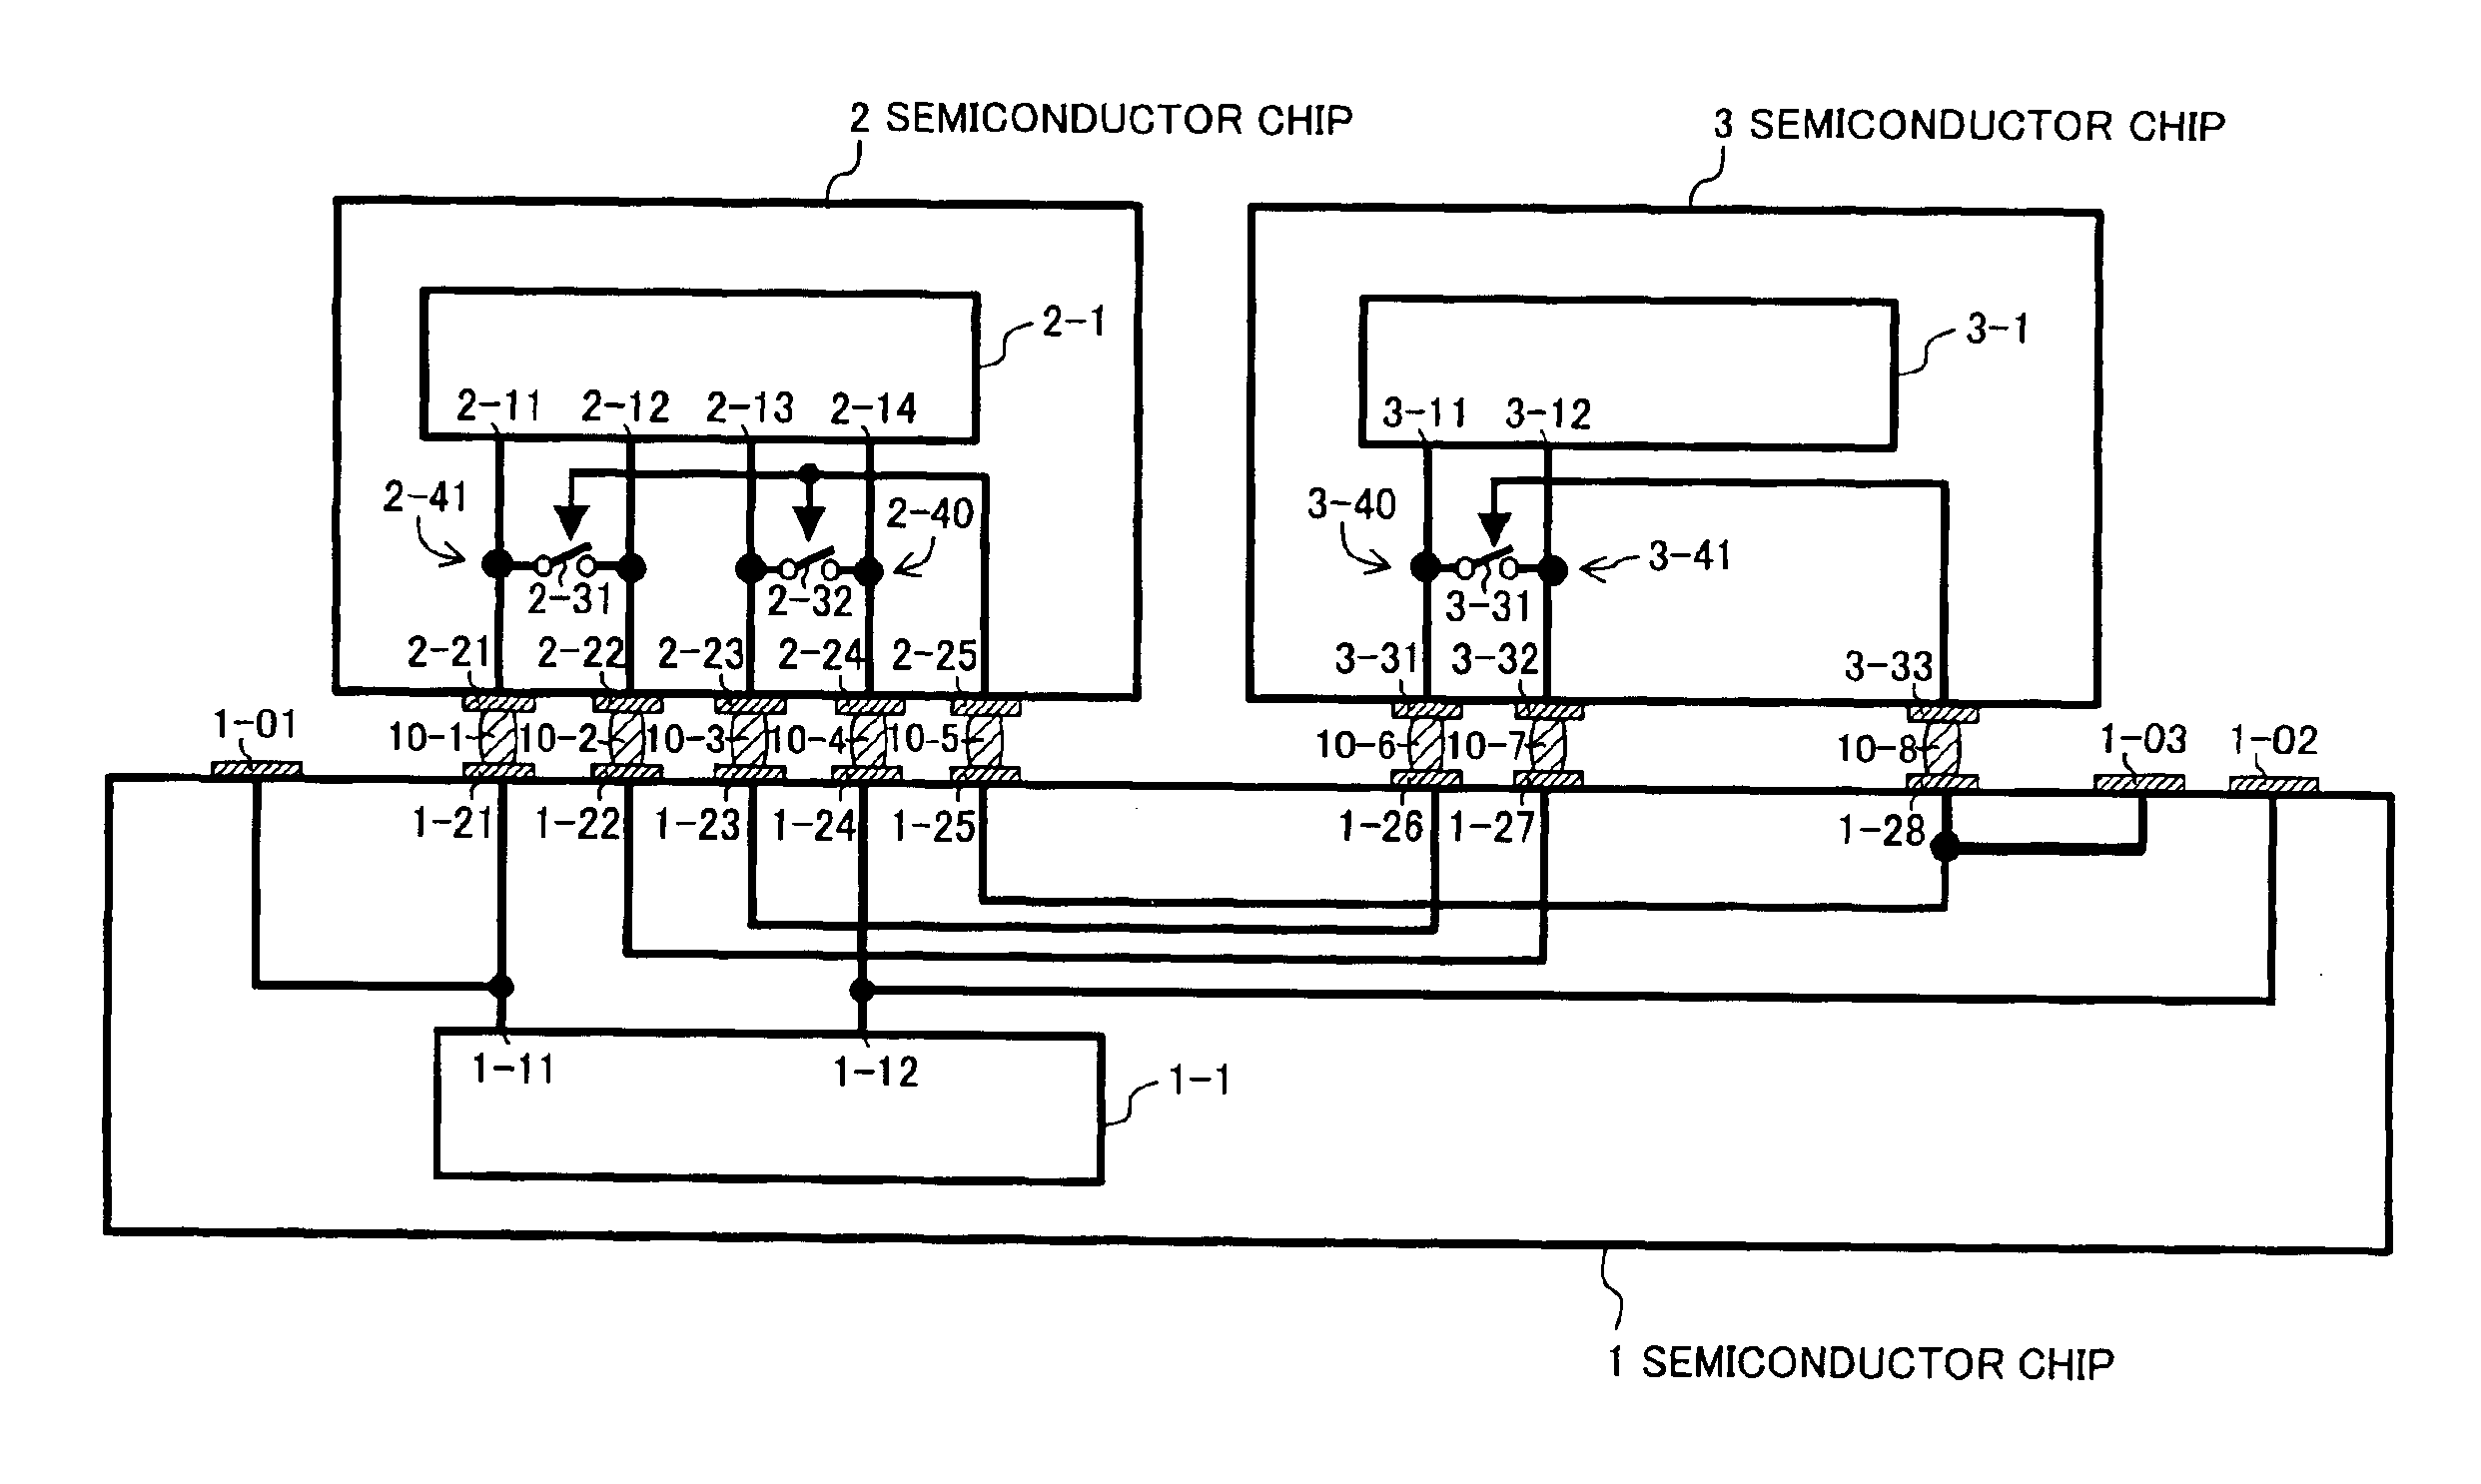 Multi-chip module, semiconductor chip, and interchip connection test method for multi-chip module